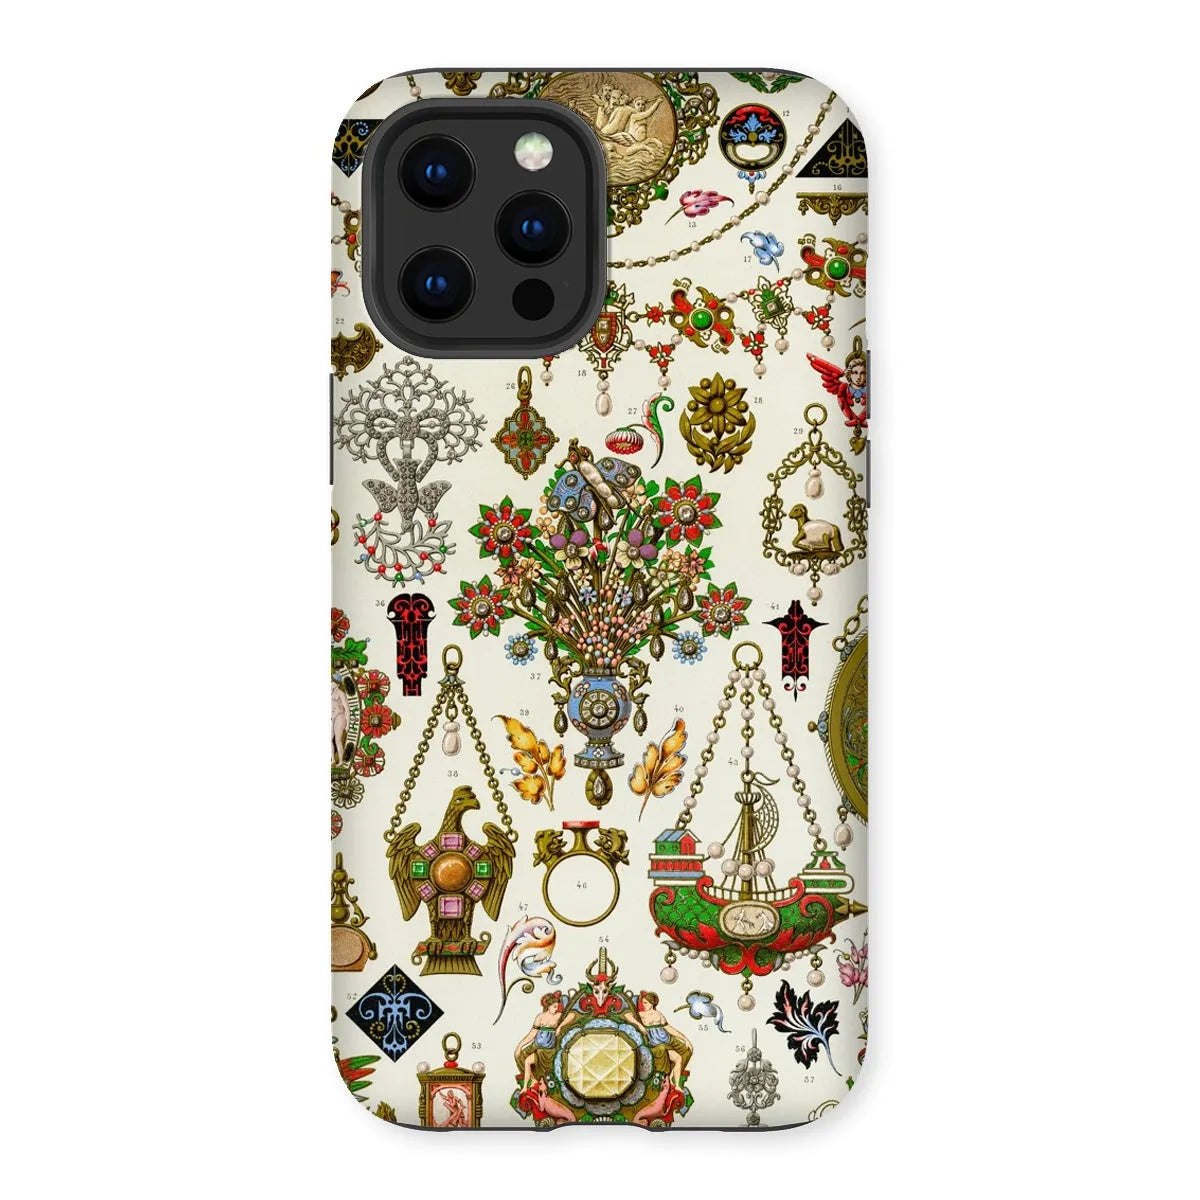 French Jewelry By Auguste Racinet Tough Phone Case - Iphone 12 Pro Max / Matte - Mobile Phone Cases - Aesthetic Art